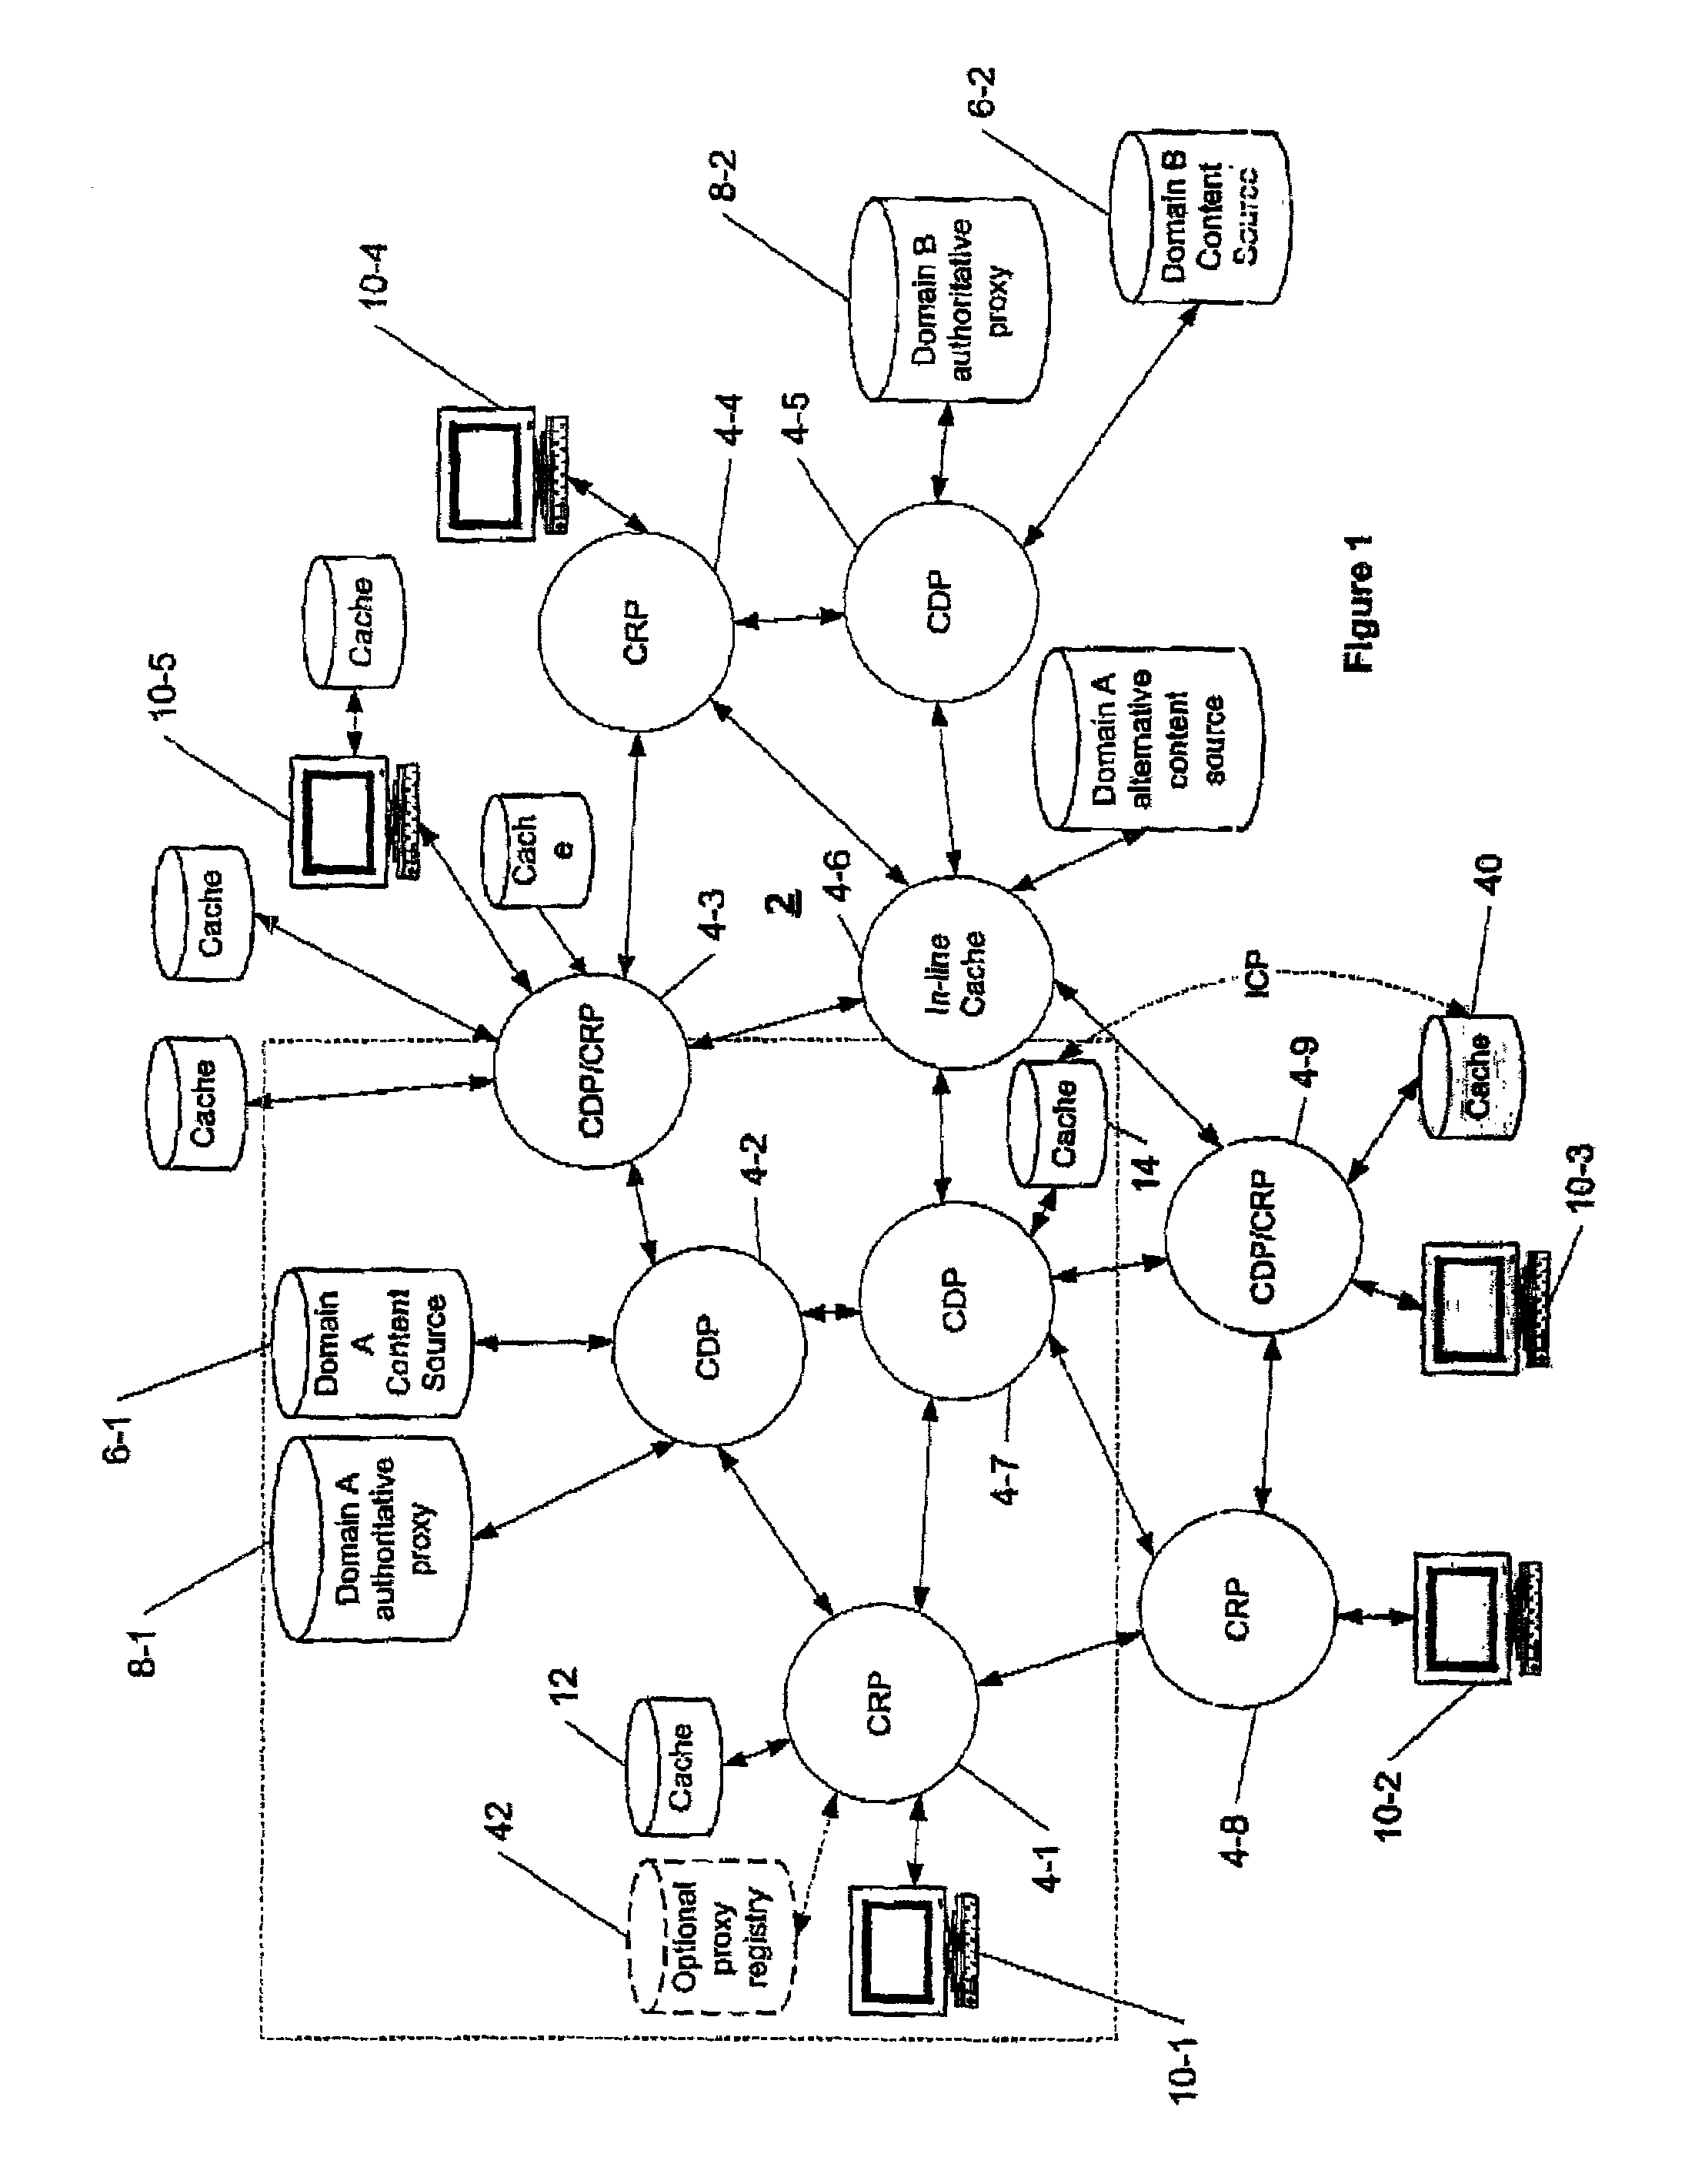 Network proxy apparatus and methods